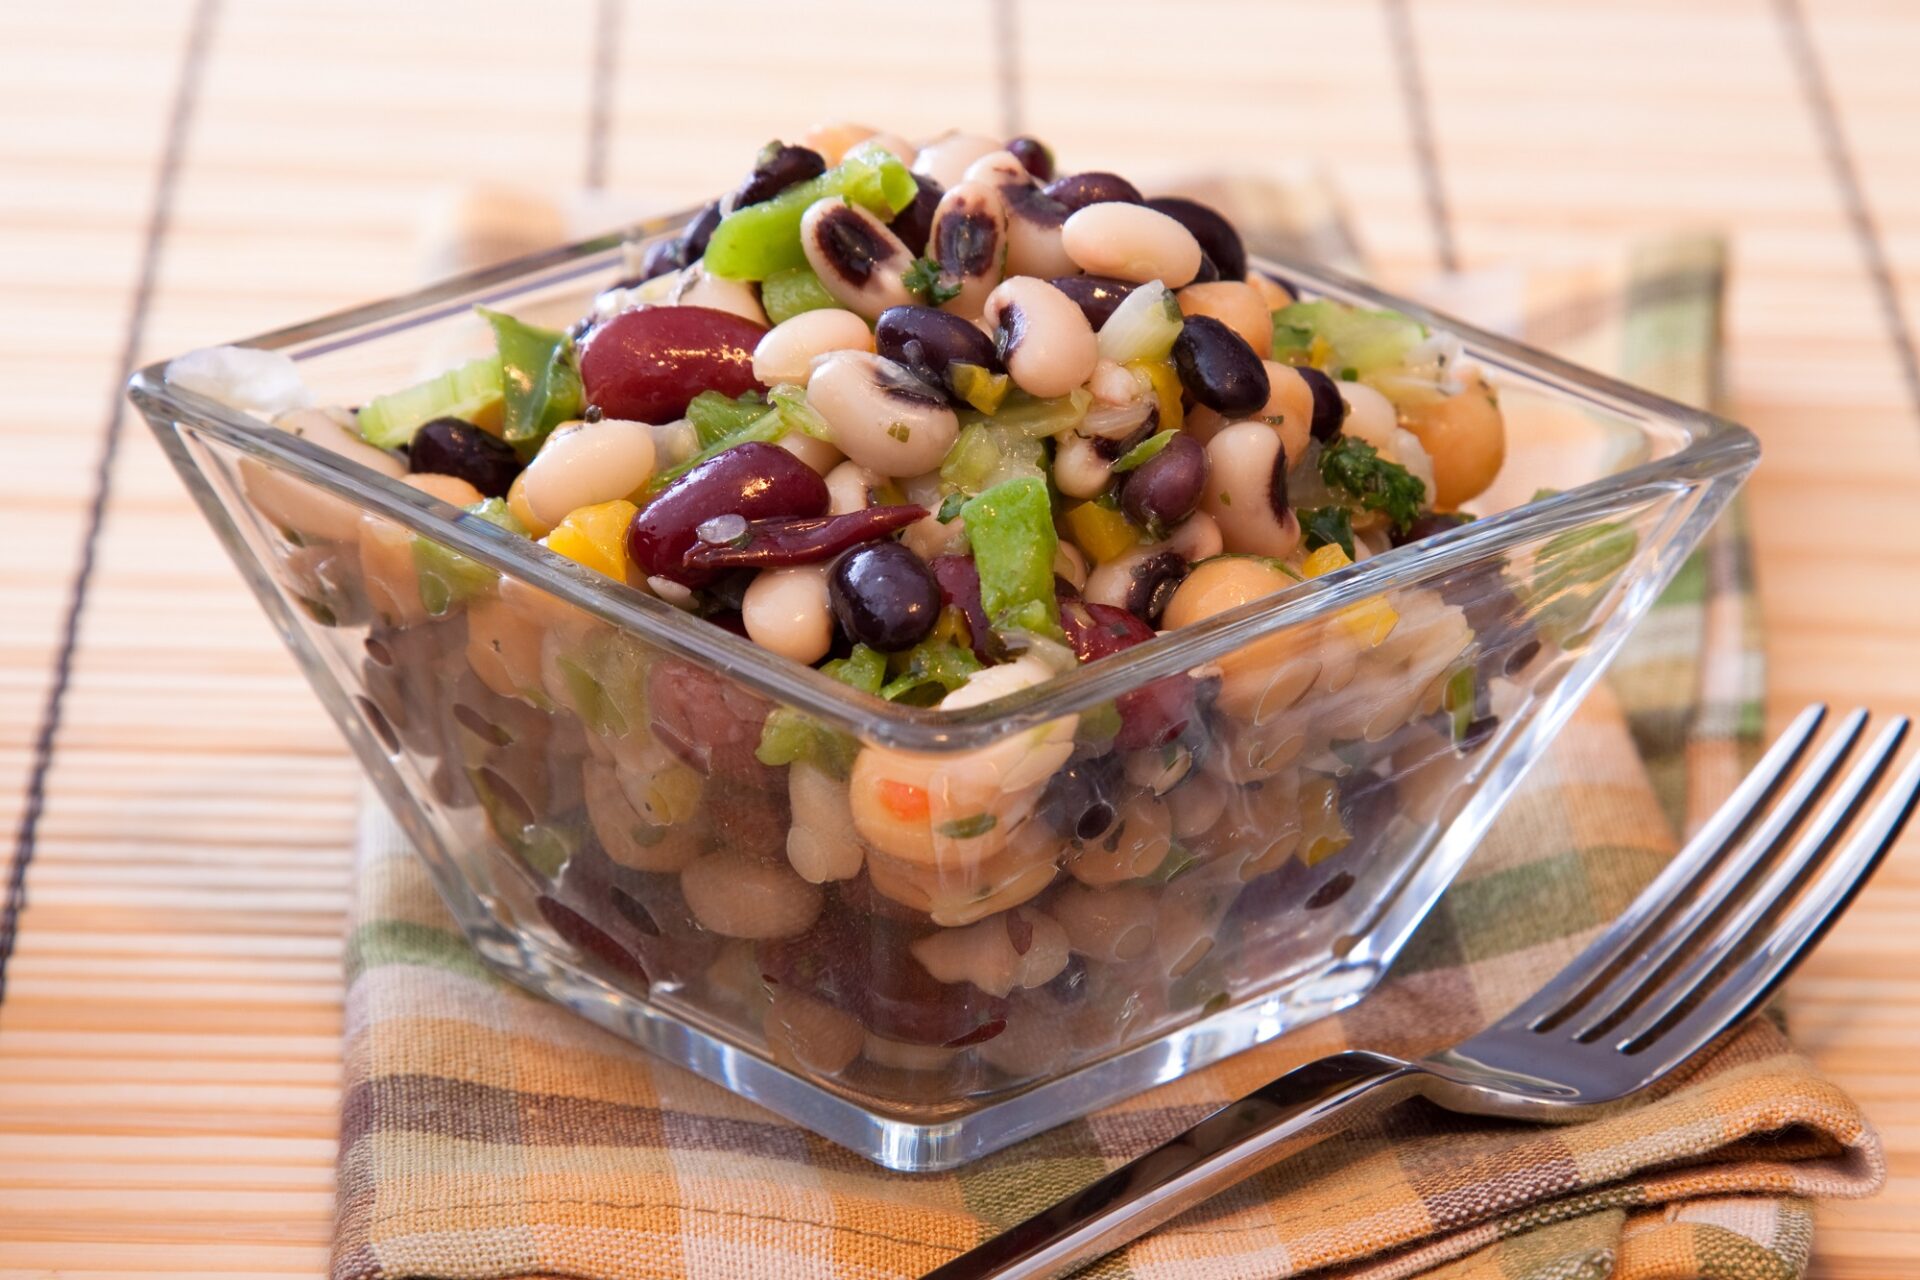 Cannellini bean salad with other kinds of beans incorporated.